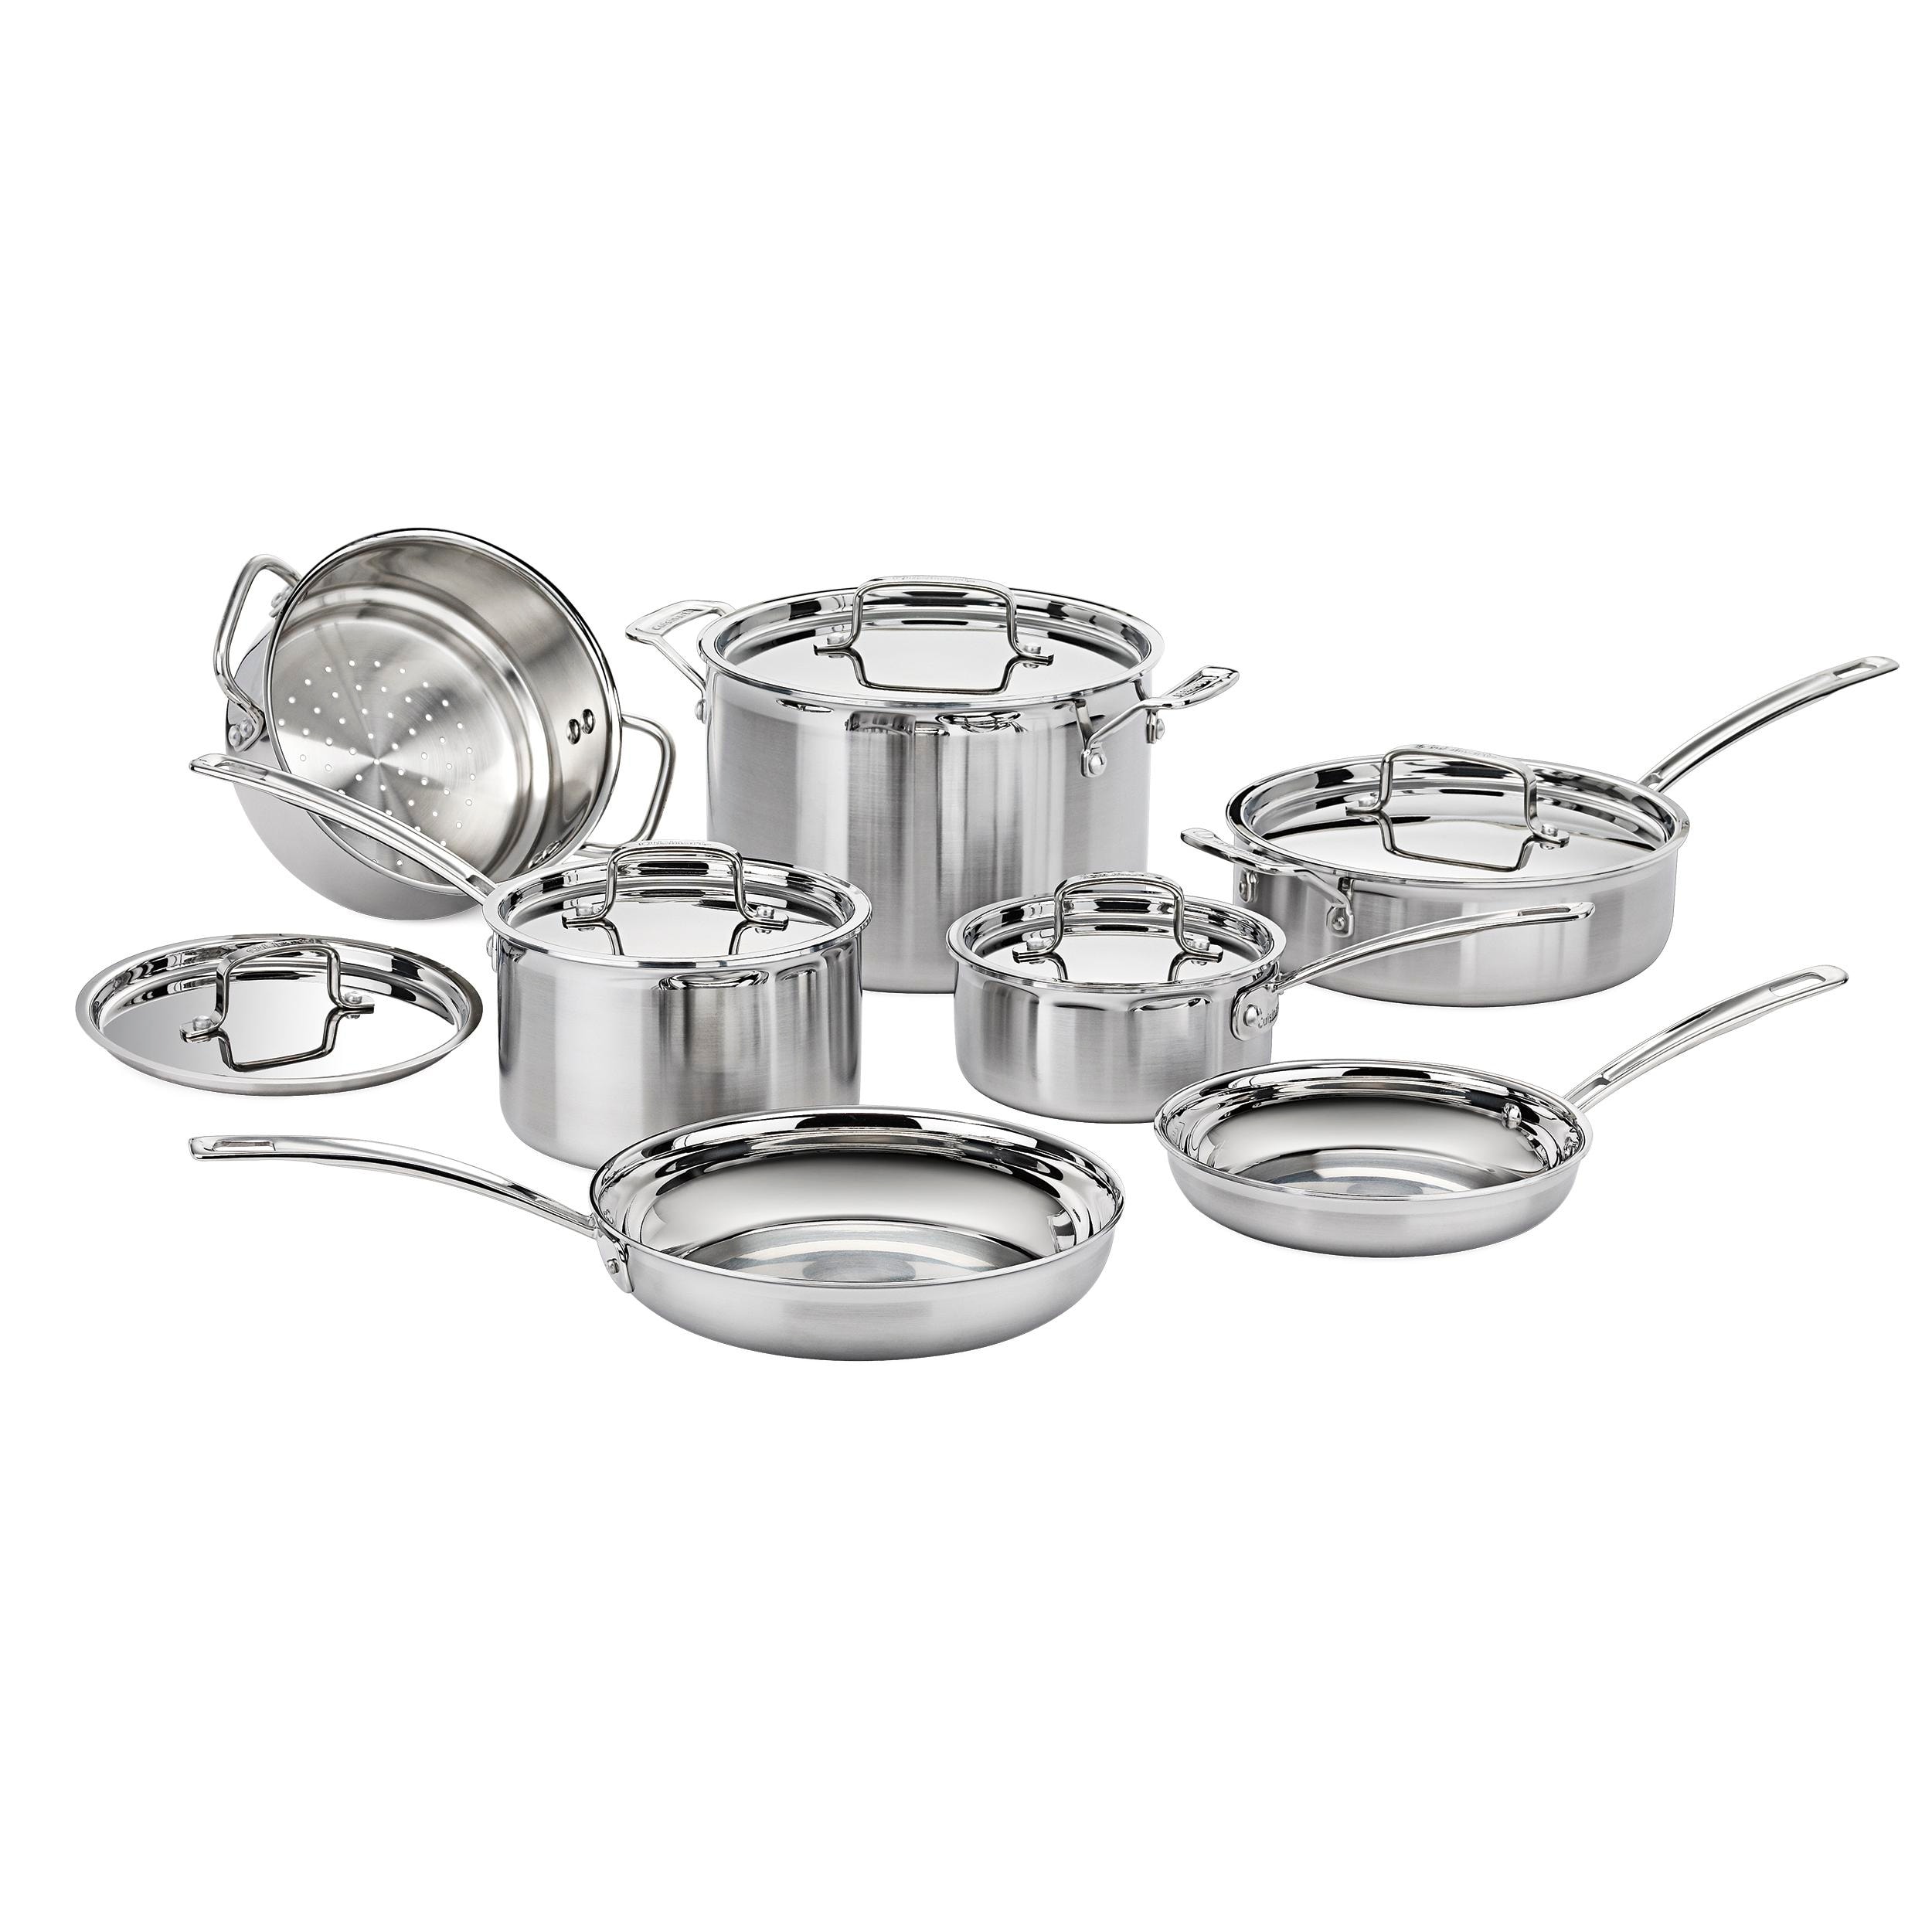 https://ak1.ostkcdn.com/images/products/is/images/direct/b8c76b3d940c52d773e4c3ad238dee6eac68bc49/Cuisinart-MultiClad-Pro-Triple-Ply-Stainless-Cookware-12-Piece-Set.jpg